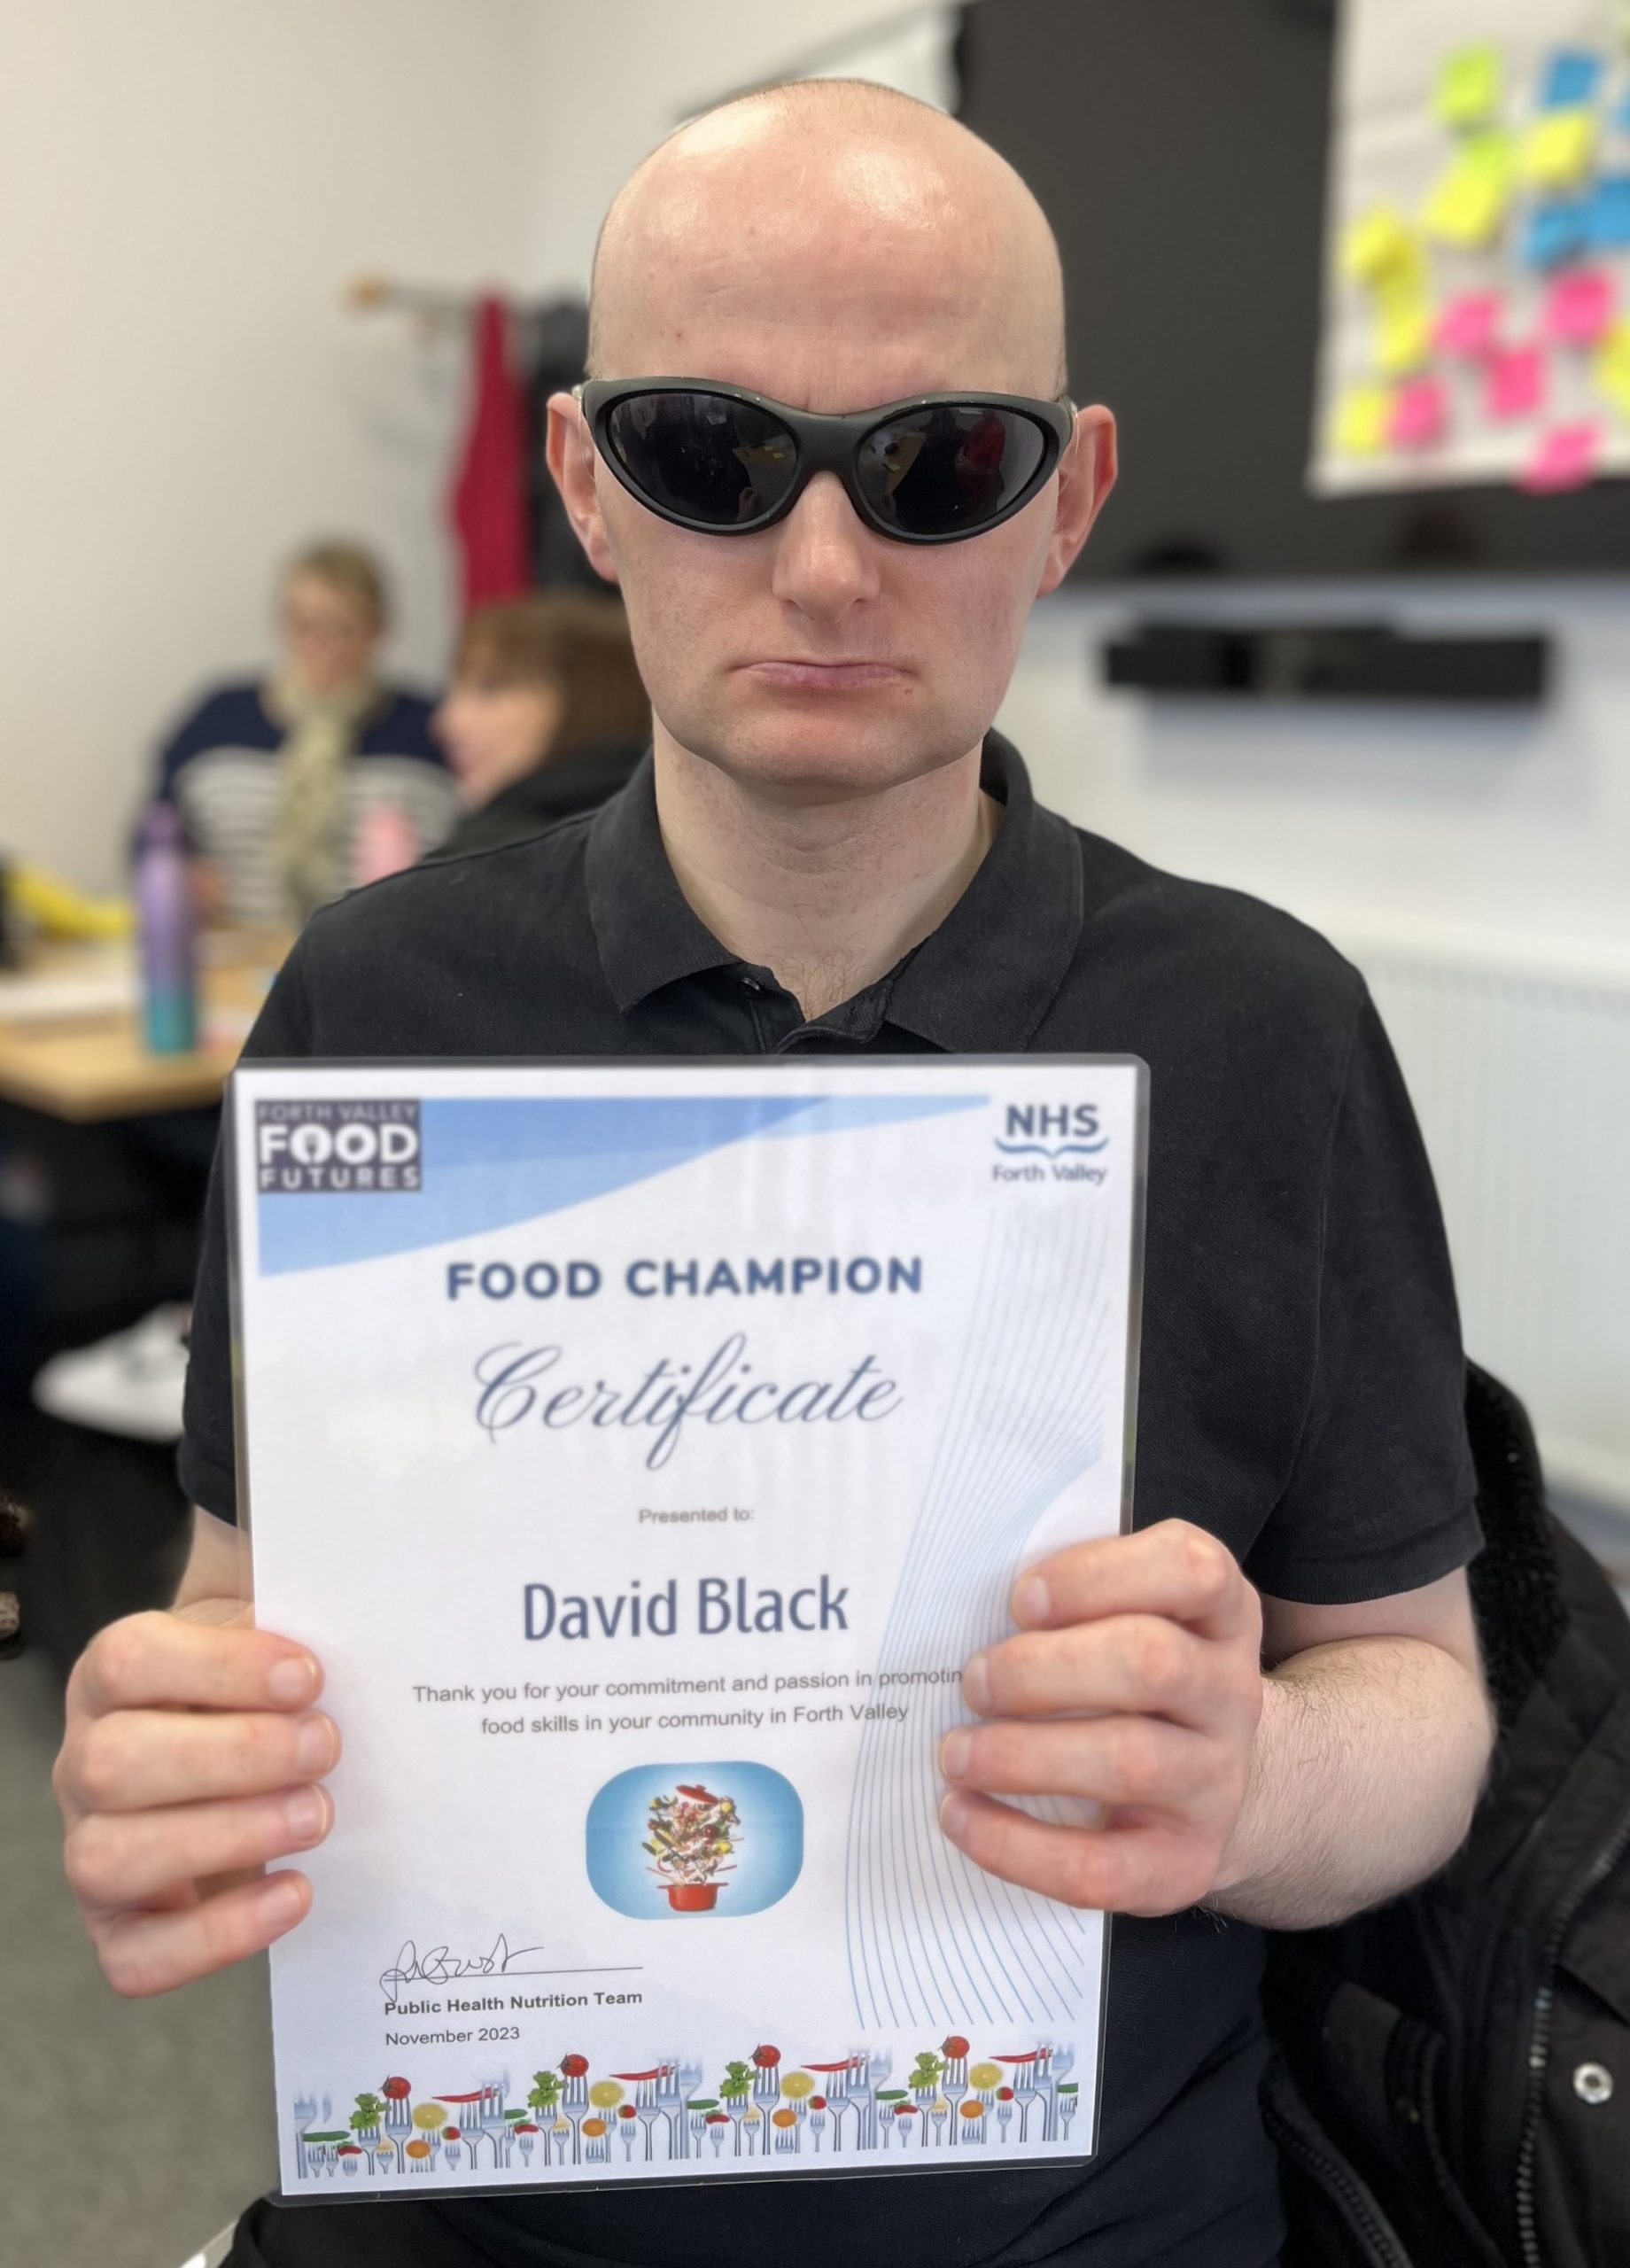 David holding up his Food Champion certificate.